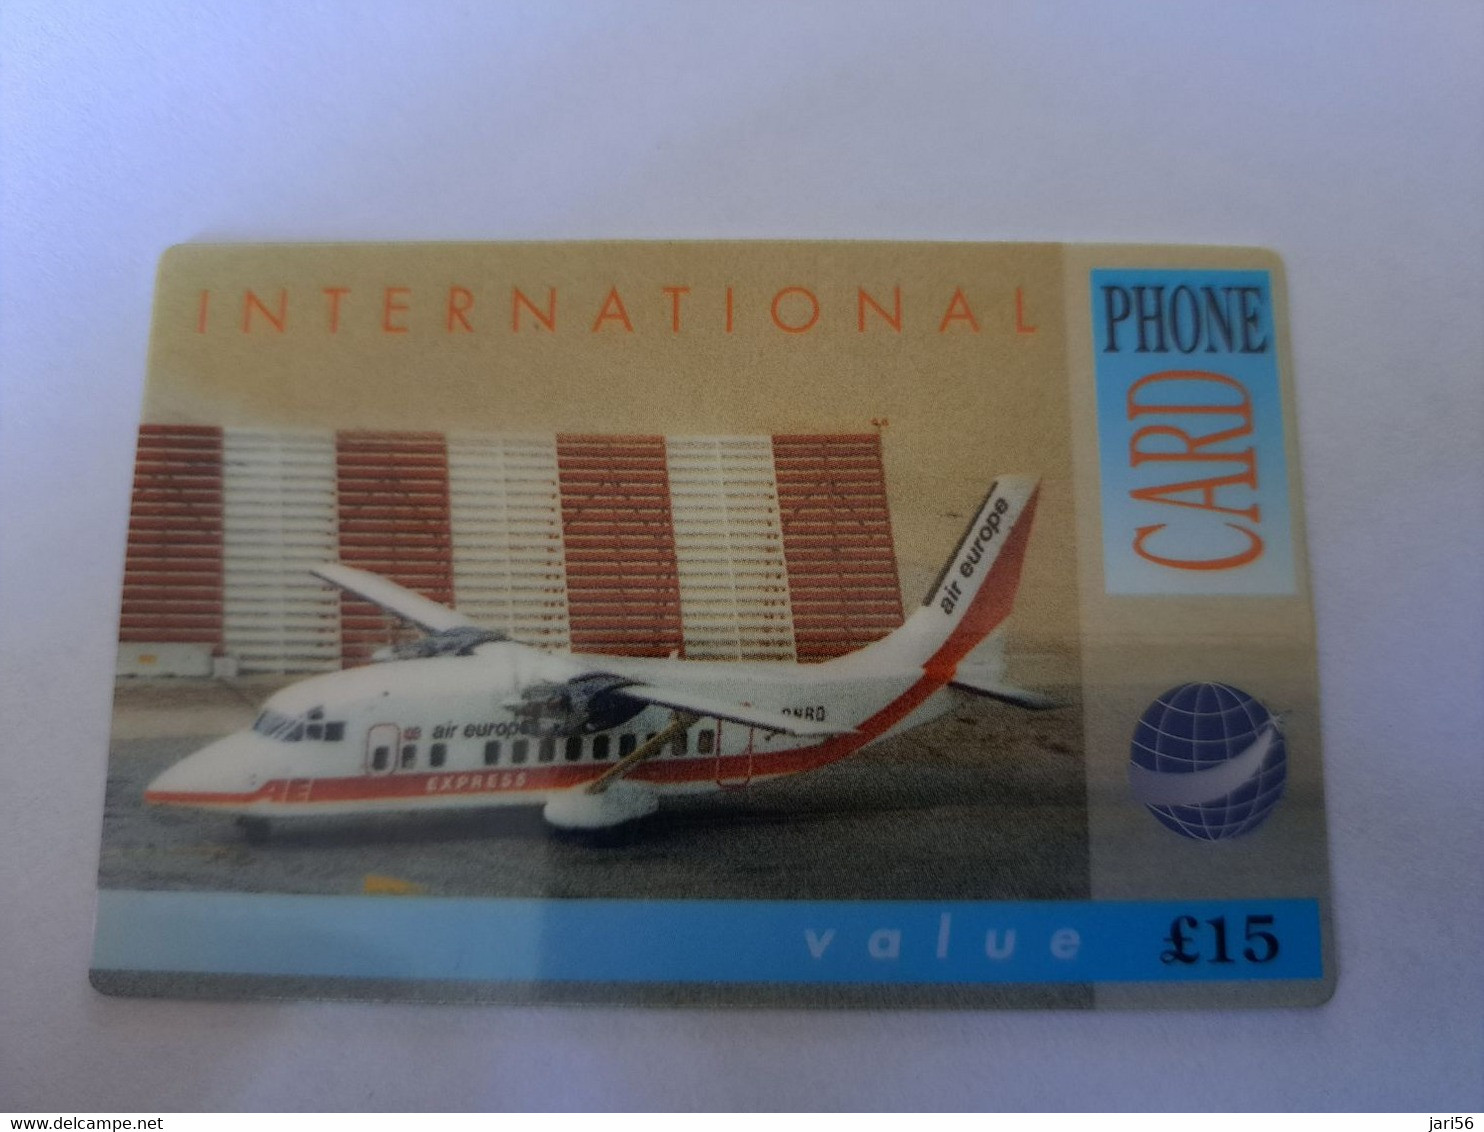 GREAT BRITAIN   15 POUND   / AEROPLANE  AIR EUROPE     DIT PHONECARD    PREPAID CARD      **12130** - [10] Collections